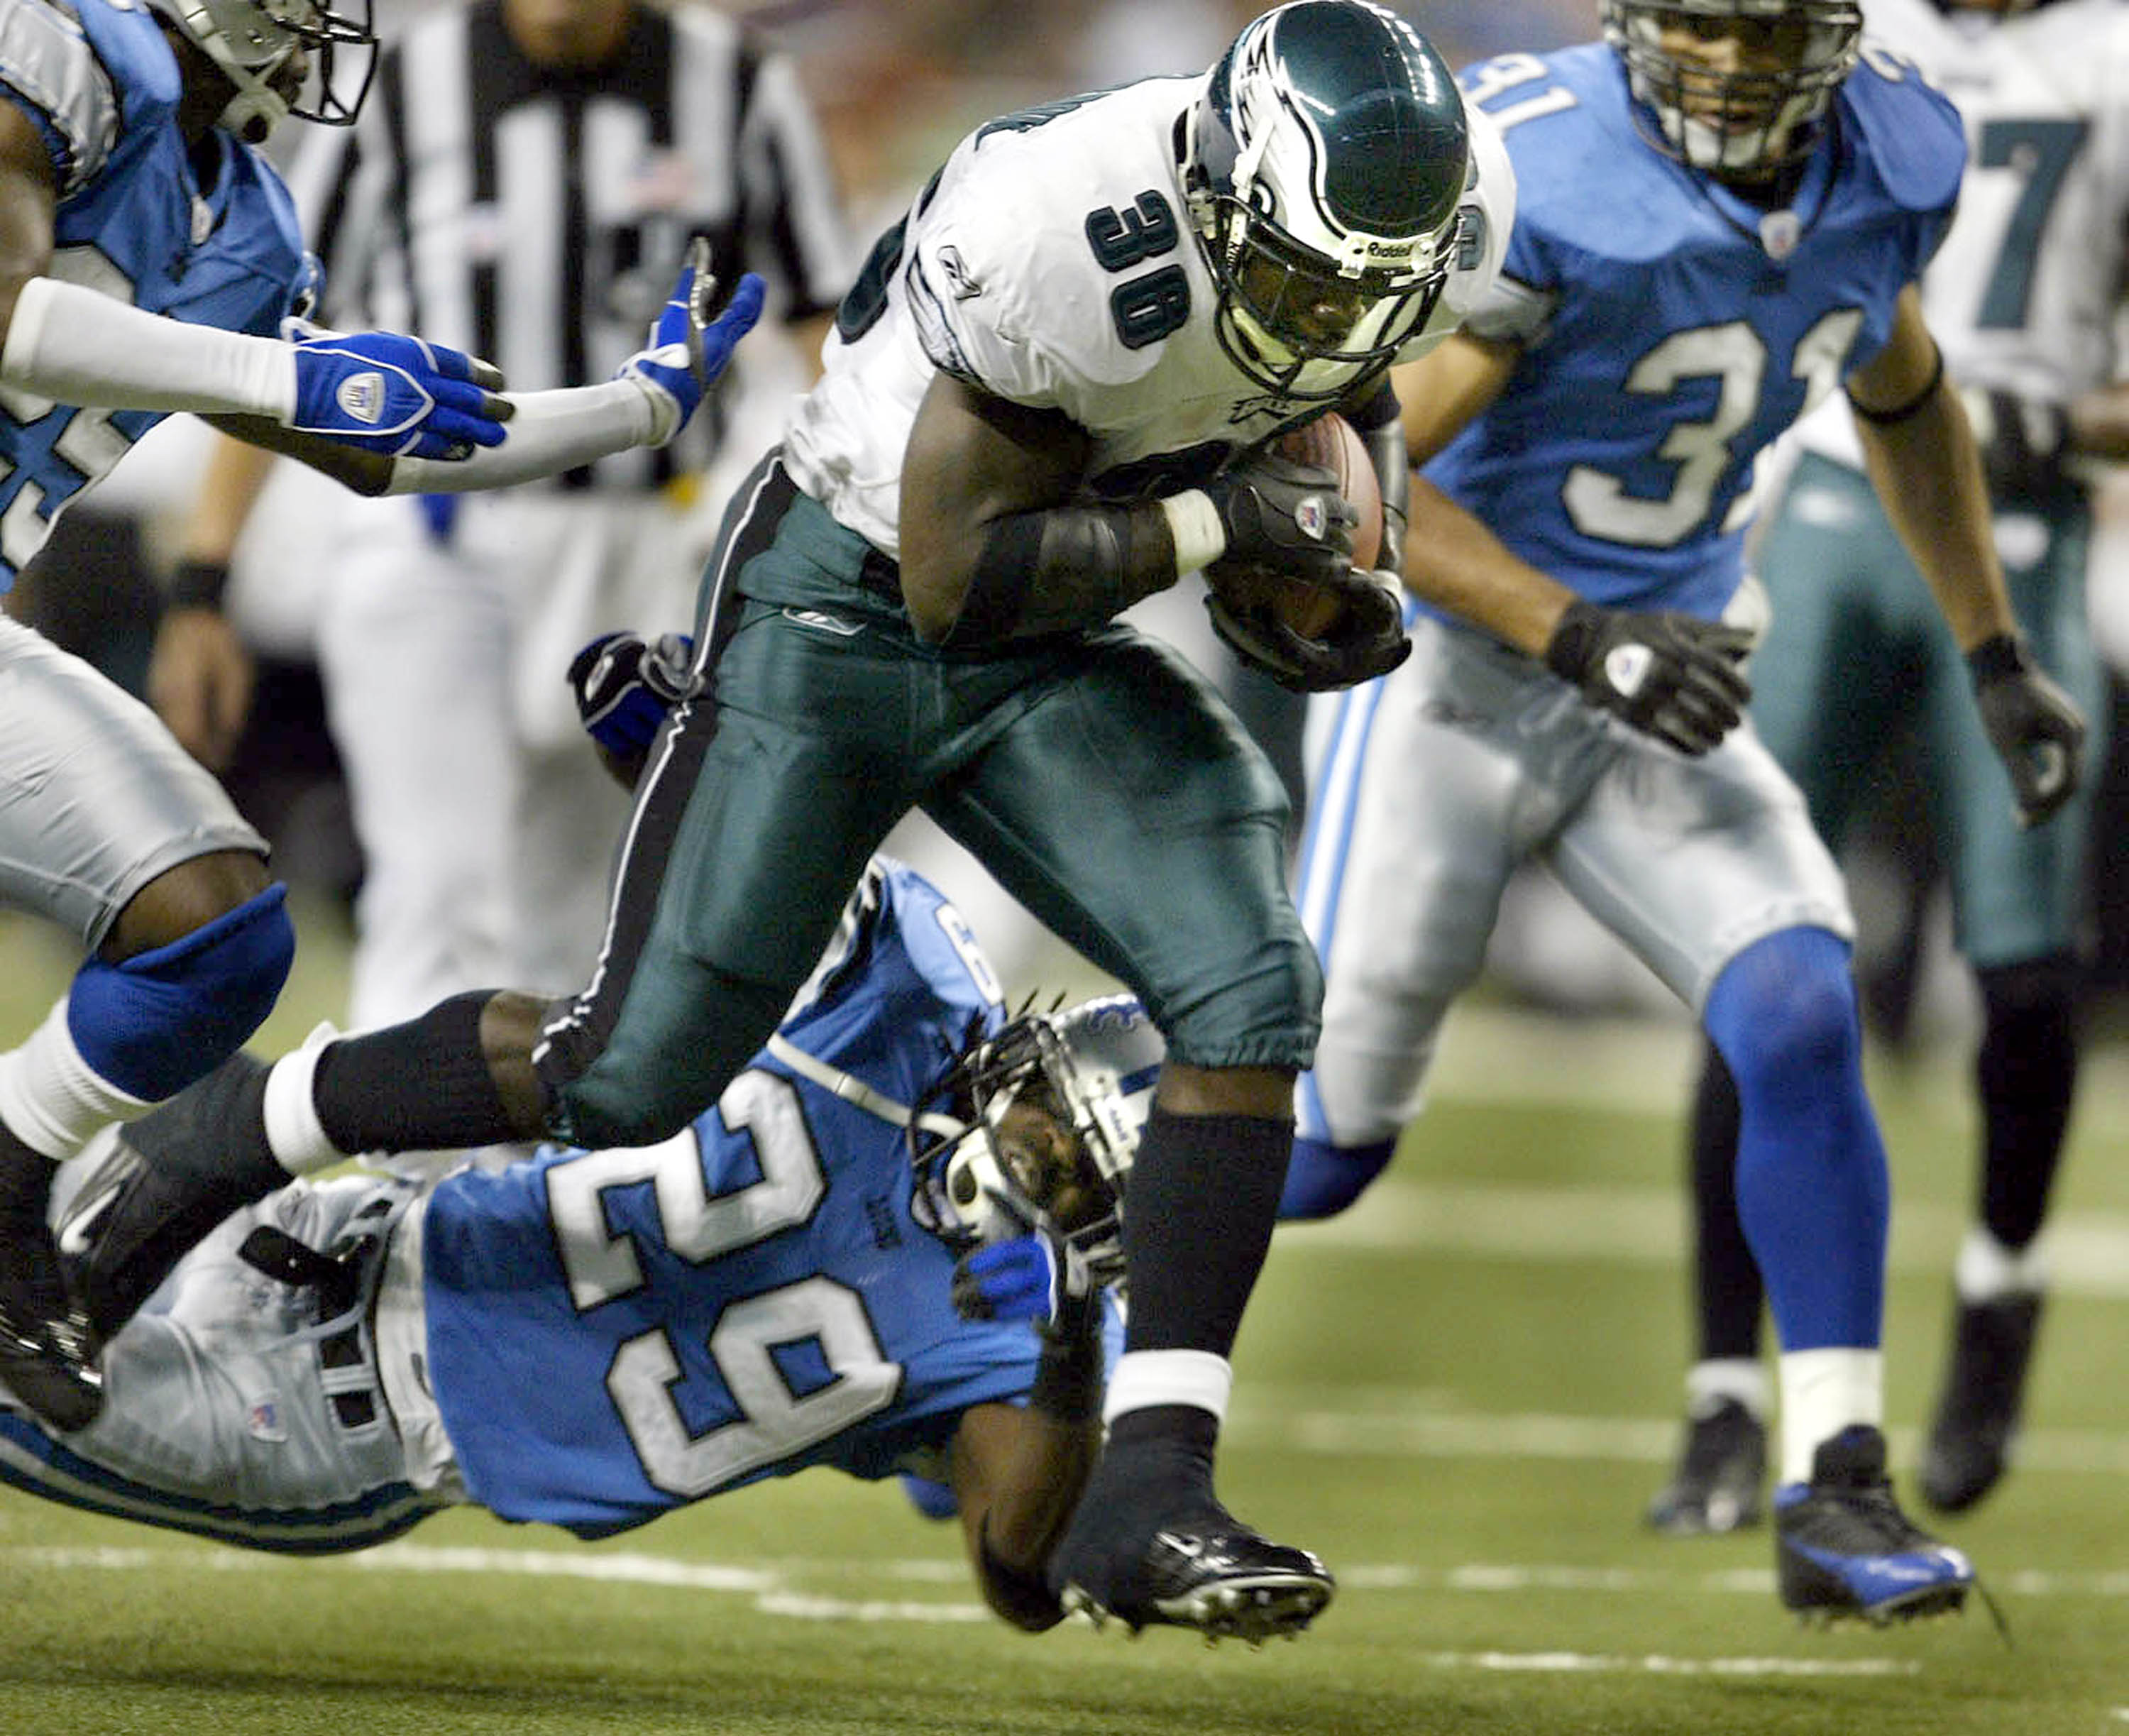 DETROIT - SEPTEMBER 26: Brian Westbrook #36 of the Philadelphia Eagles rushes for a first down defended by Chris Cash #29 of the Detroit Lions in the second quarter at Ford Field on September 26, 2004 in Detroit, Michigan. (Photo by Tom Pidgeon/Getty Imag